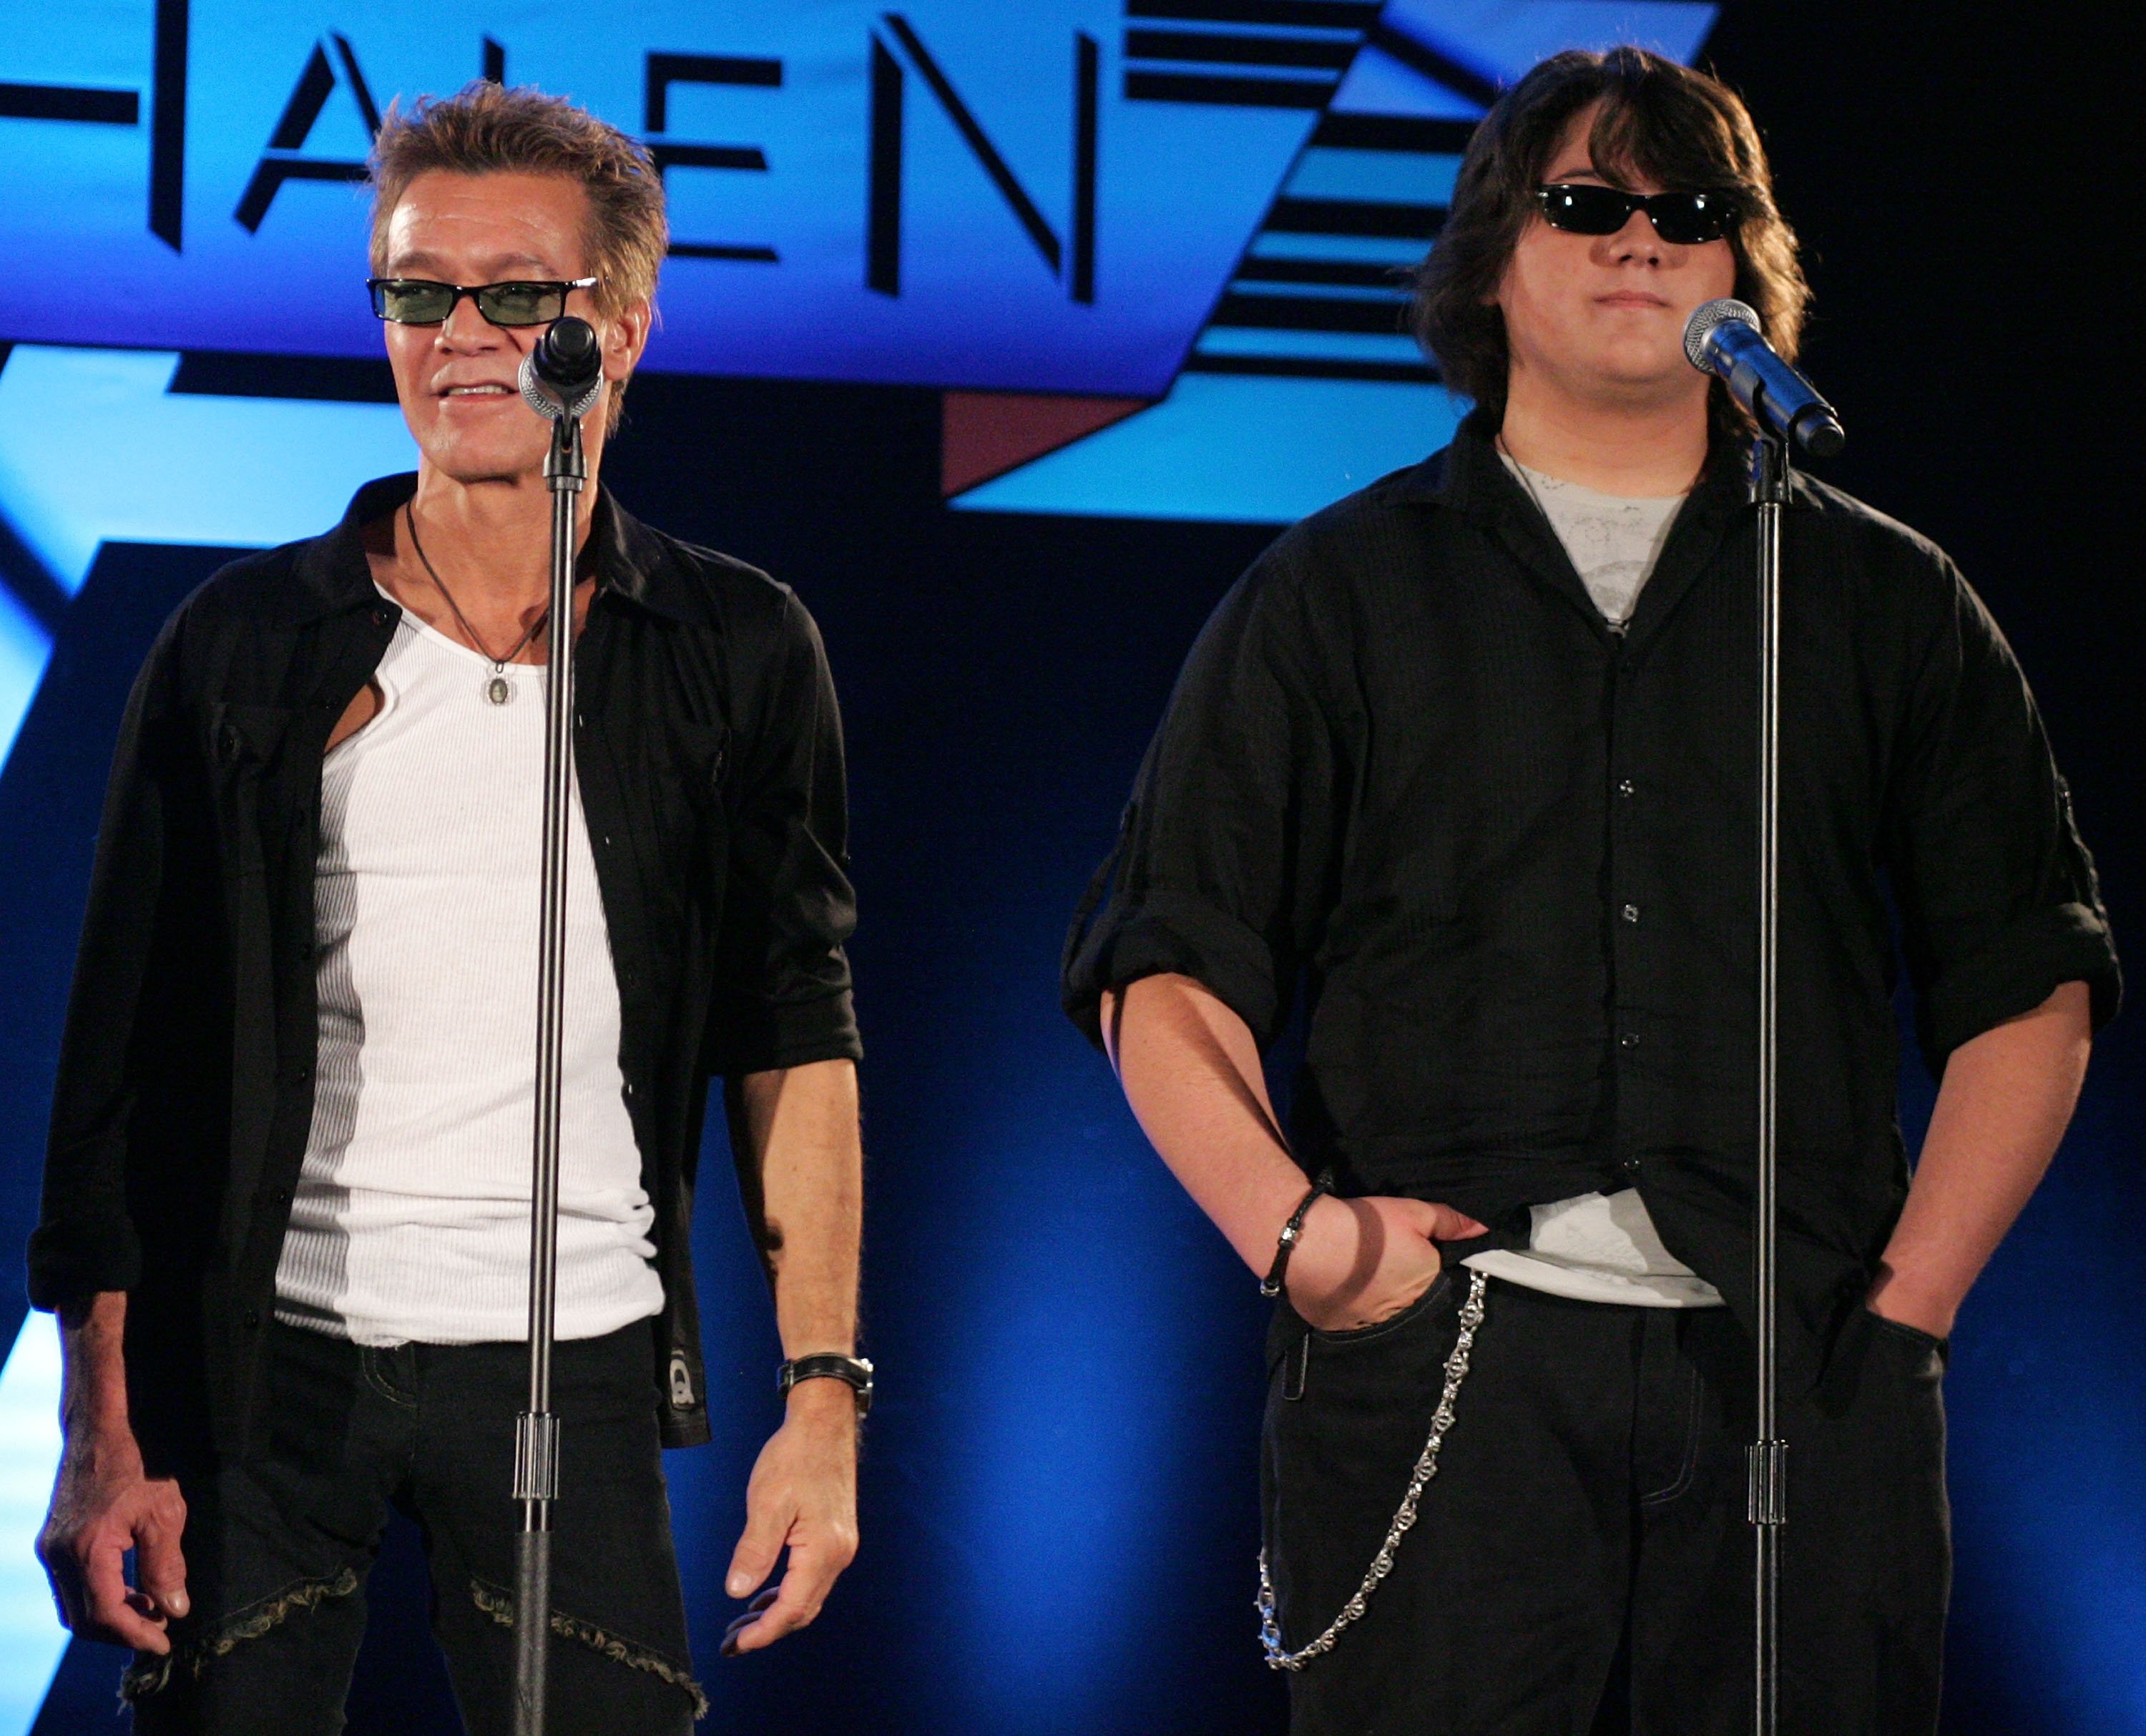 Eddie Van Halen and Wolfgang Van Halen at the Van Halen and David Lee Roth press conference announcing their North American Tour at the Four Seasons Hotel on August 13, 2007, in Los Angeles, California. | Source: Getty Images